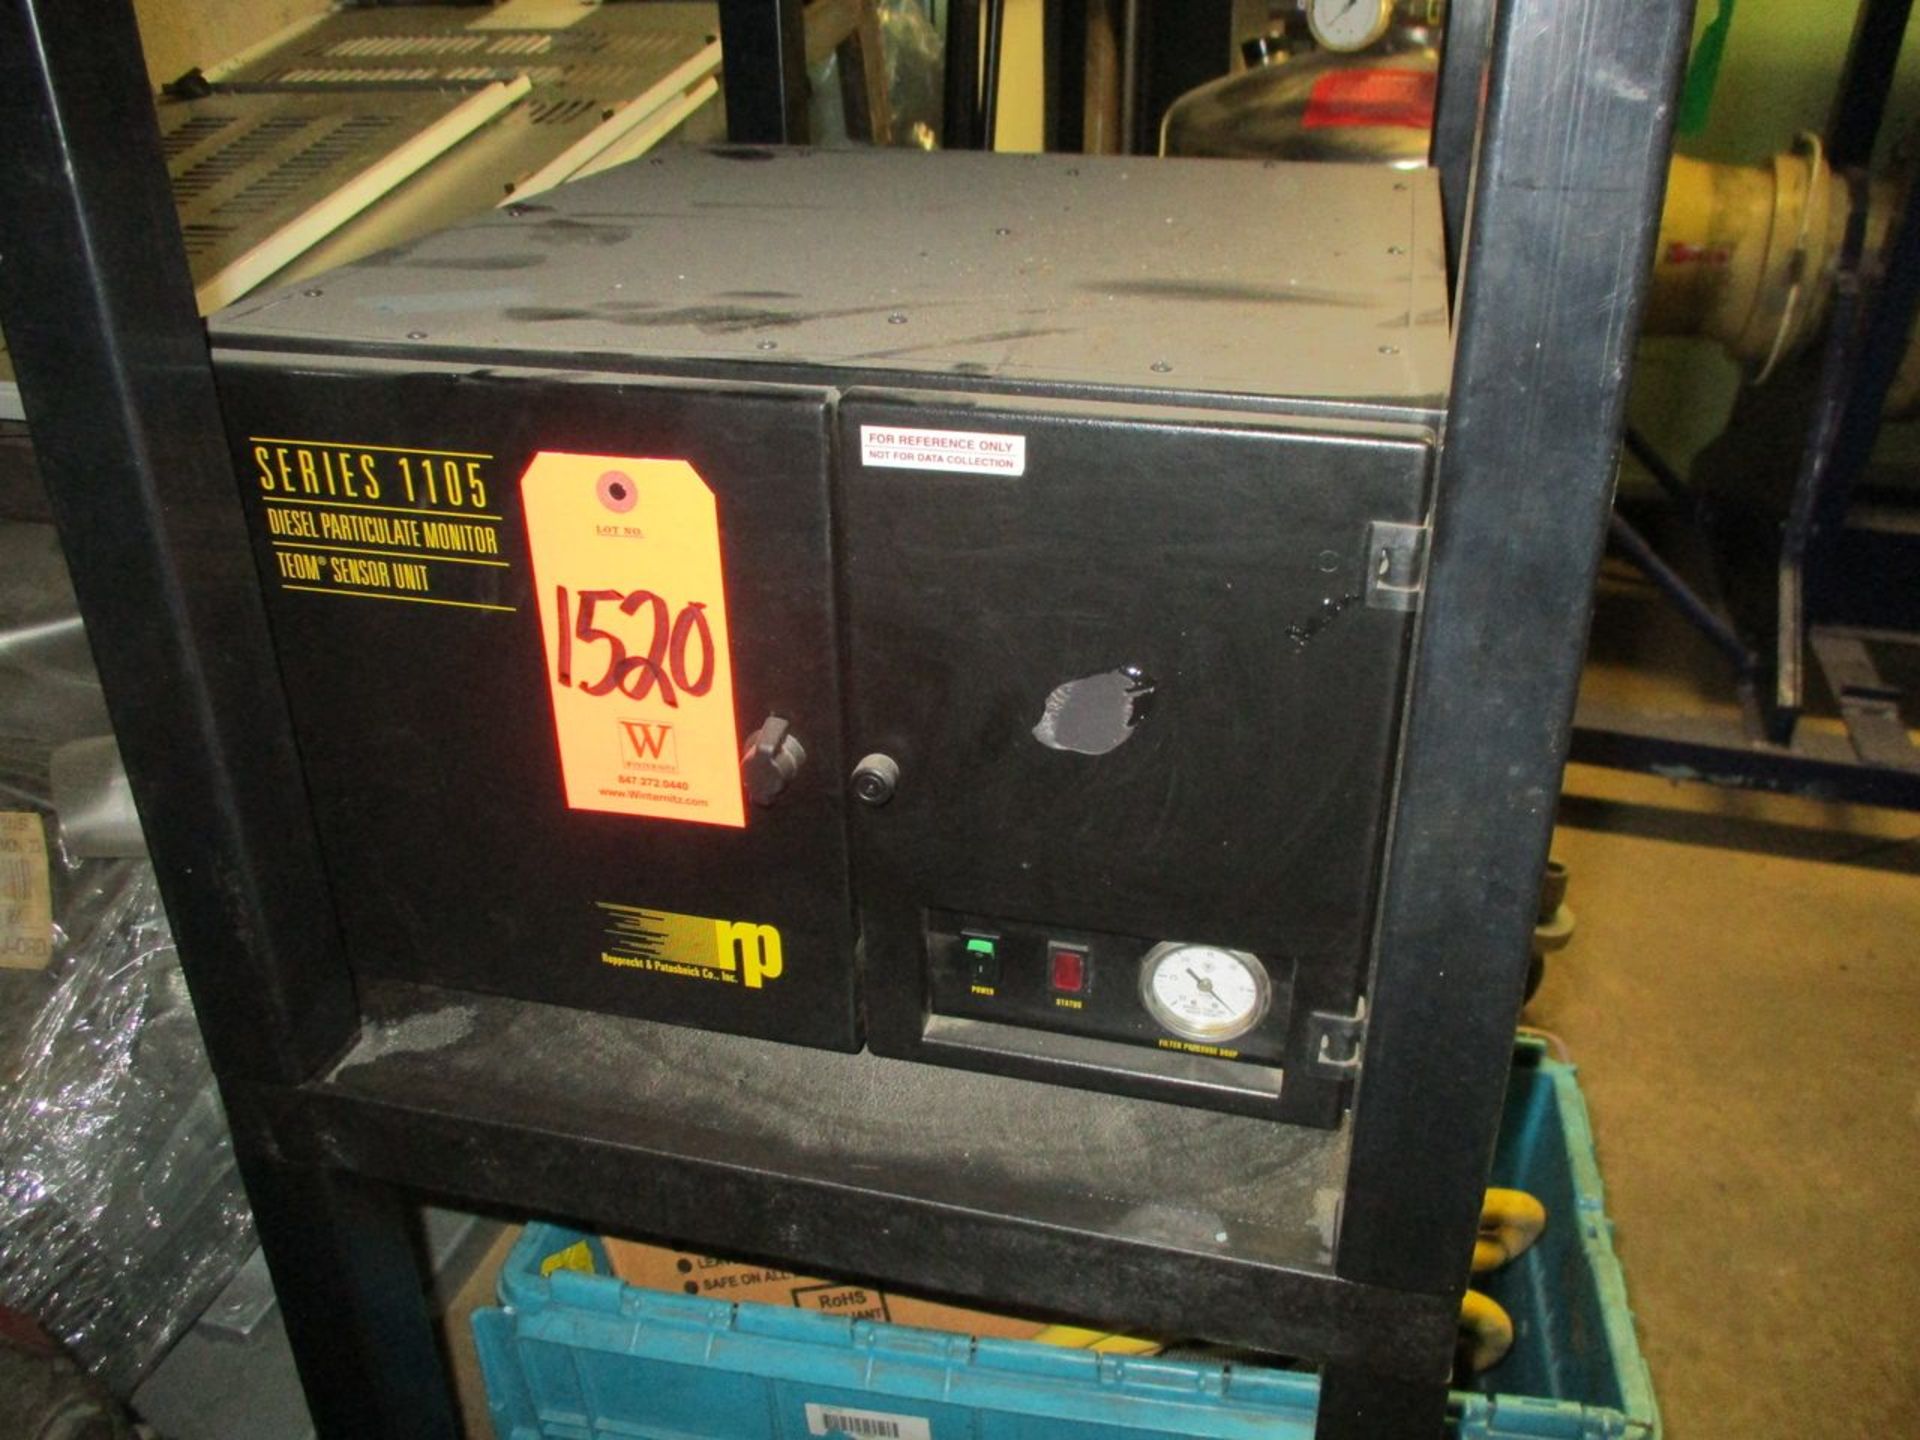 Rupprect & Pataschnick Co. 1105 Diesel Particulate Monitor TEOM Sensor Unit (Basement, CX 32, Cage